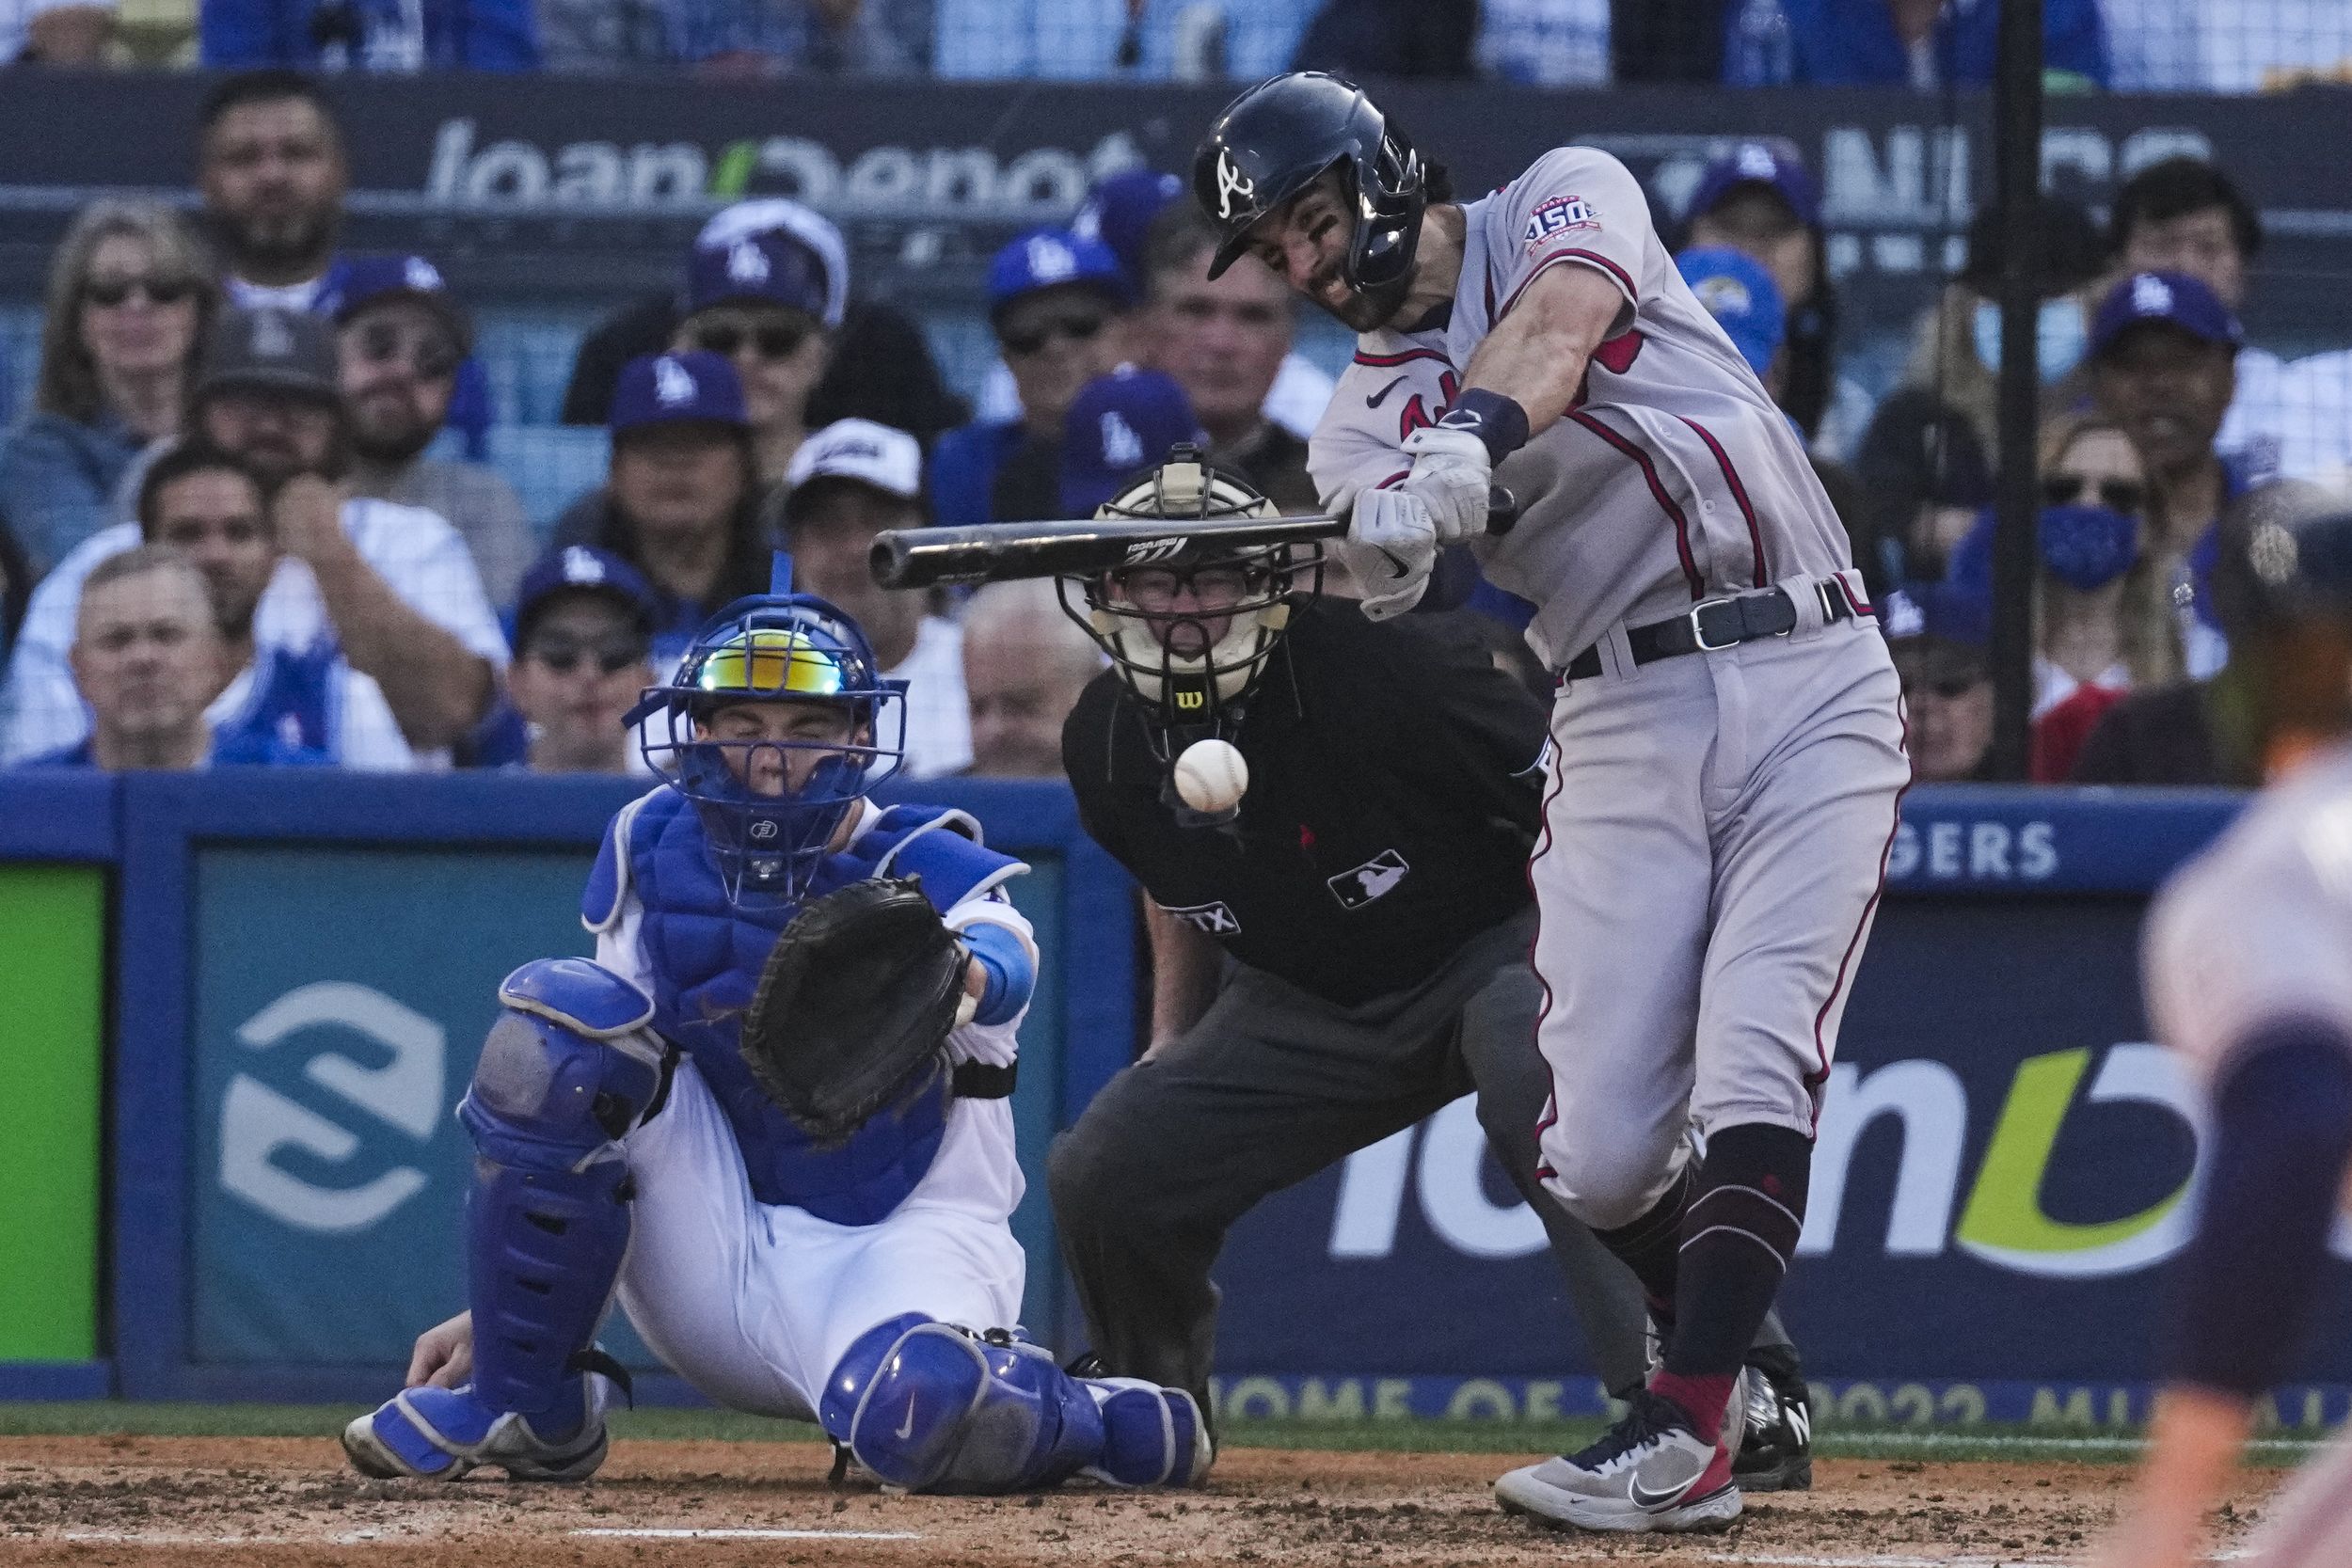 Cody Bellinger, Mookie Betts rally Dodgers, cut Braves' NLCS lead to 2-1